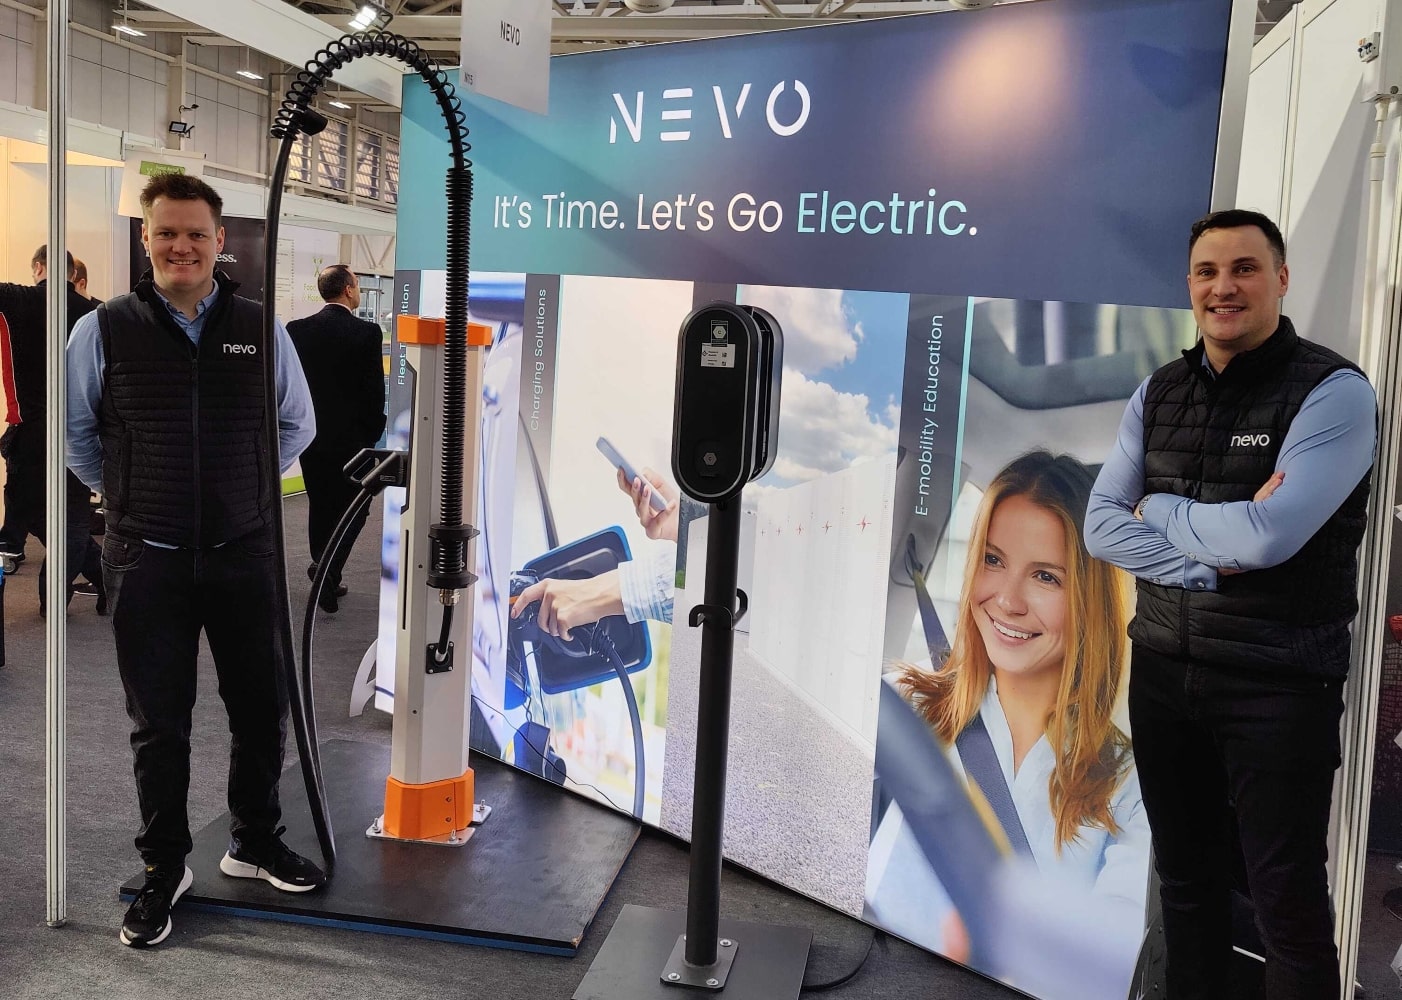 Derek and Liam are cool standing on the Nevo stand